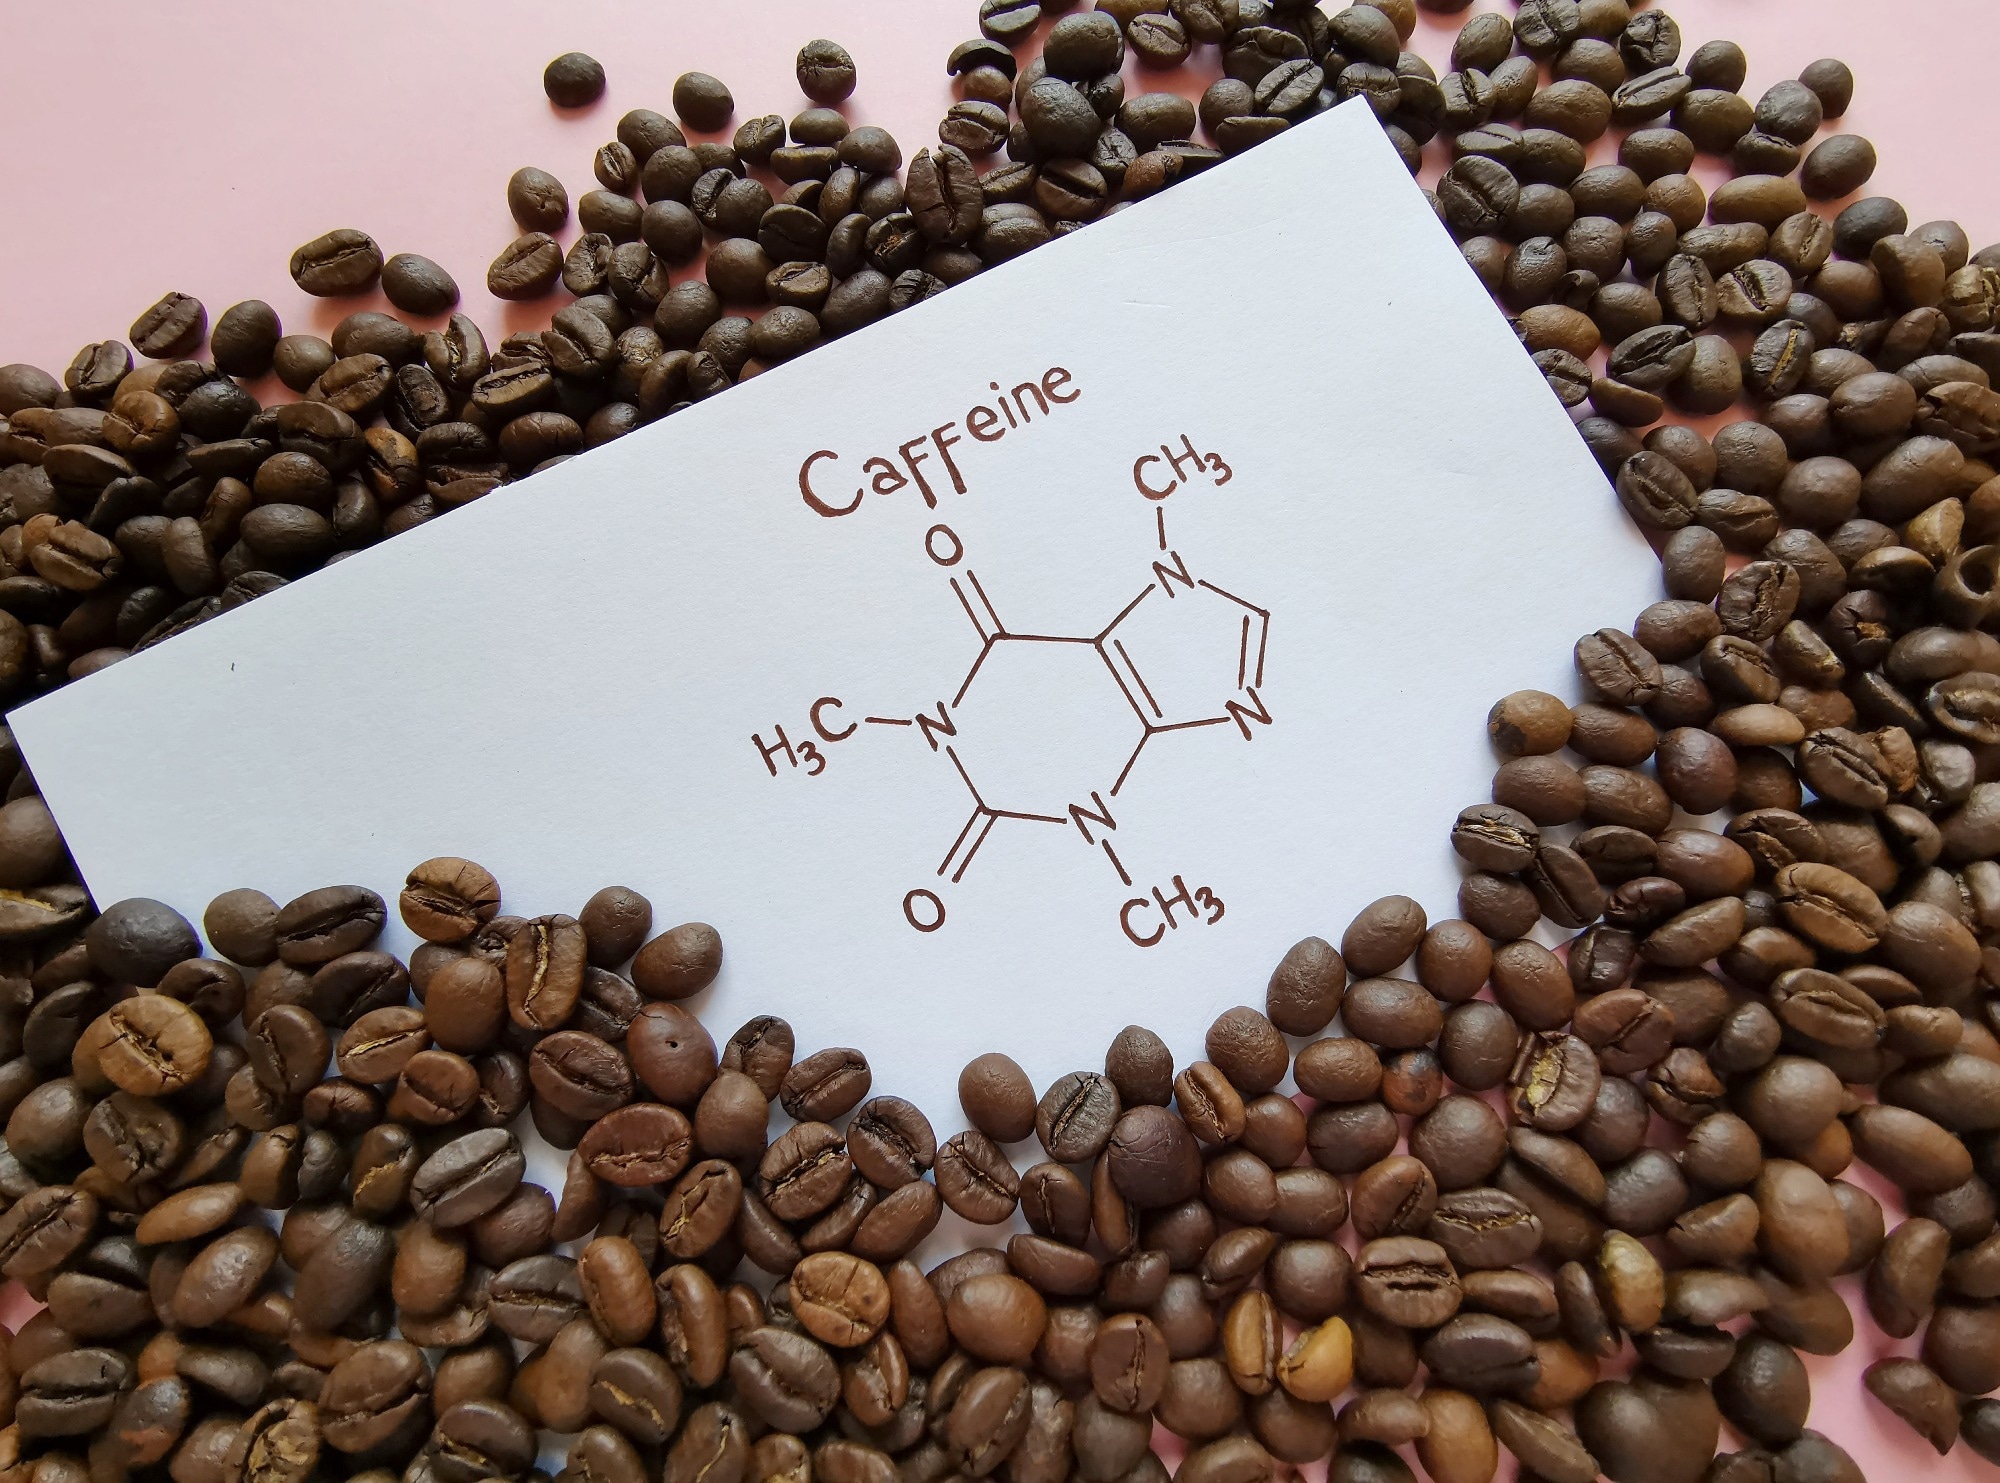 Does caffeine interact with genetic risk factors for Parkinson’s disease in Asians?